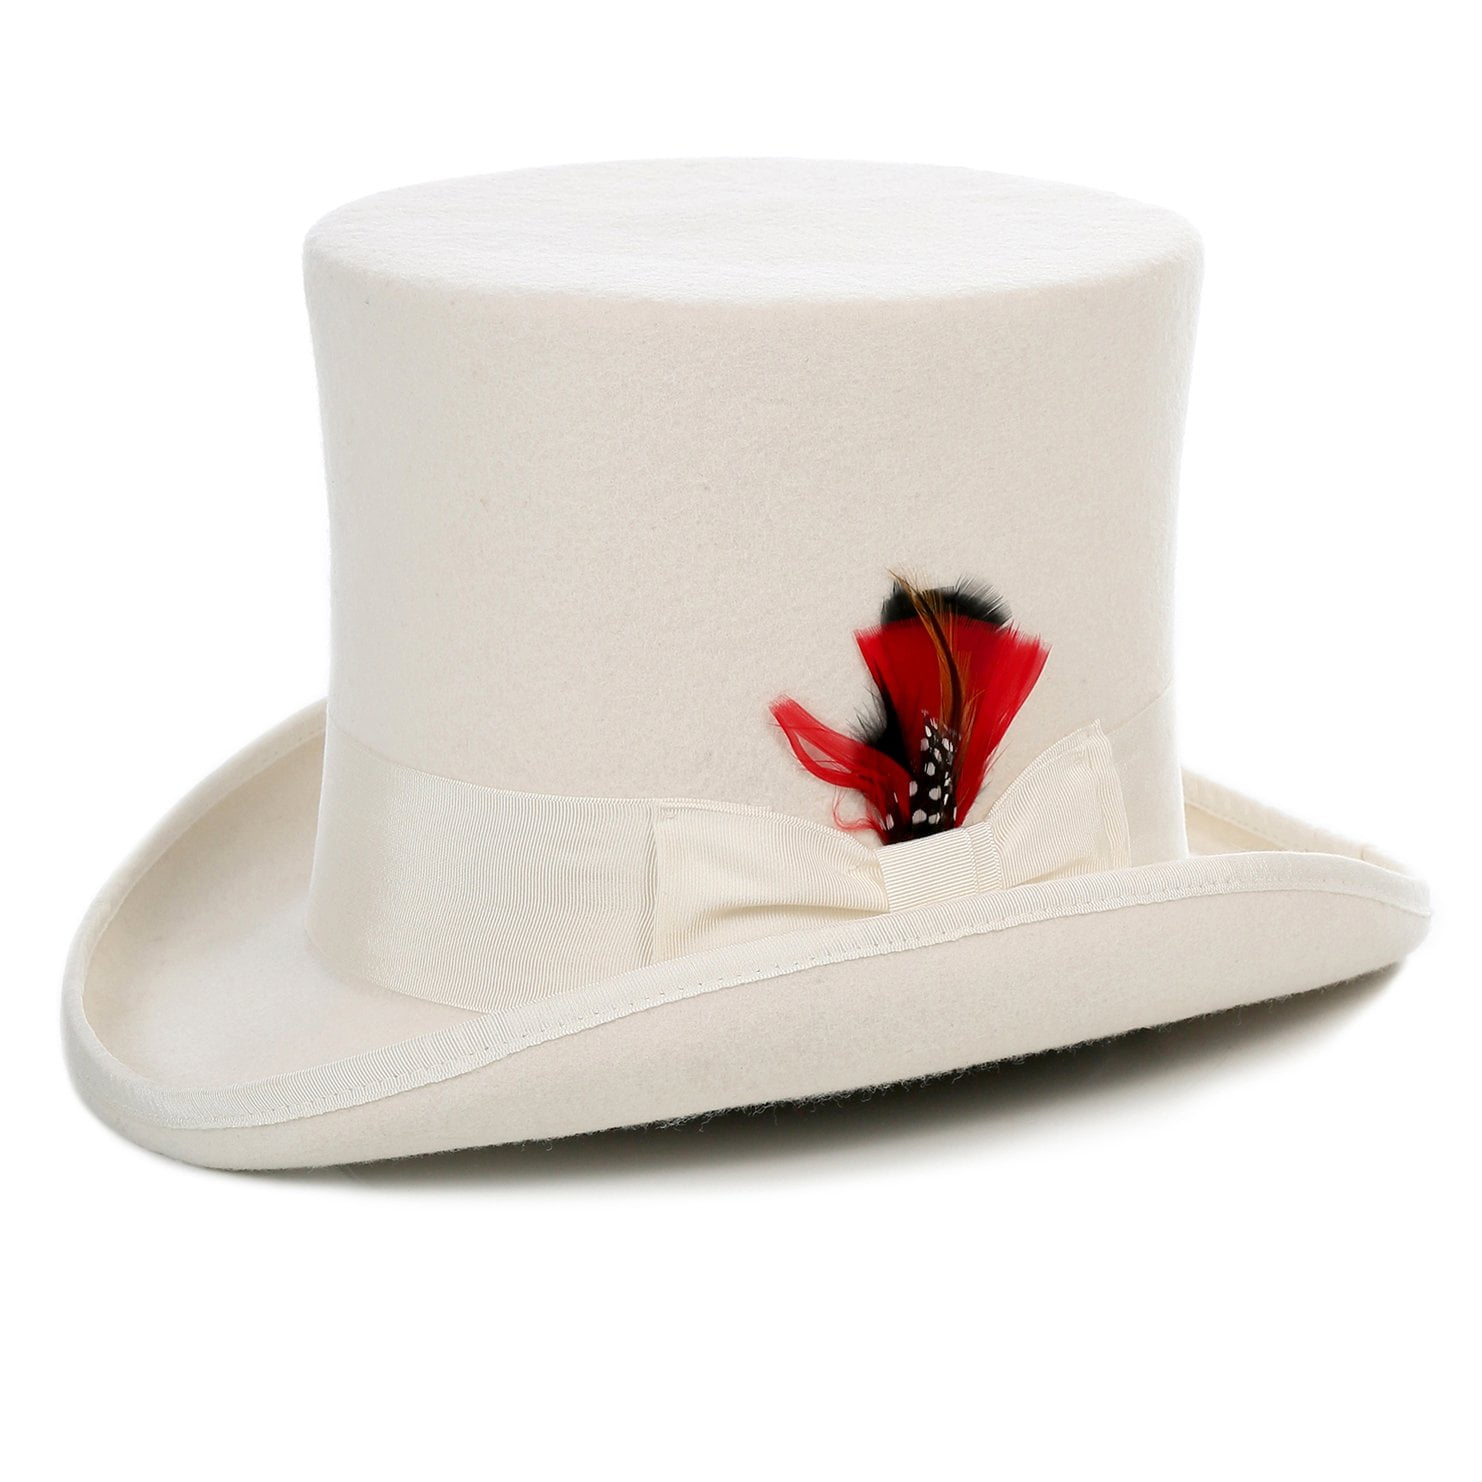 Unisex Wedding Event 100% Wool Felt White Top Hat Satin Lined With Feather 